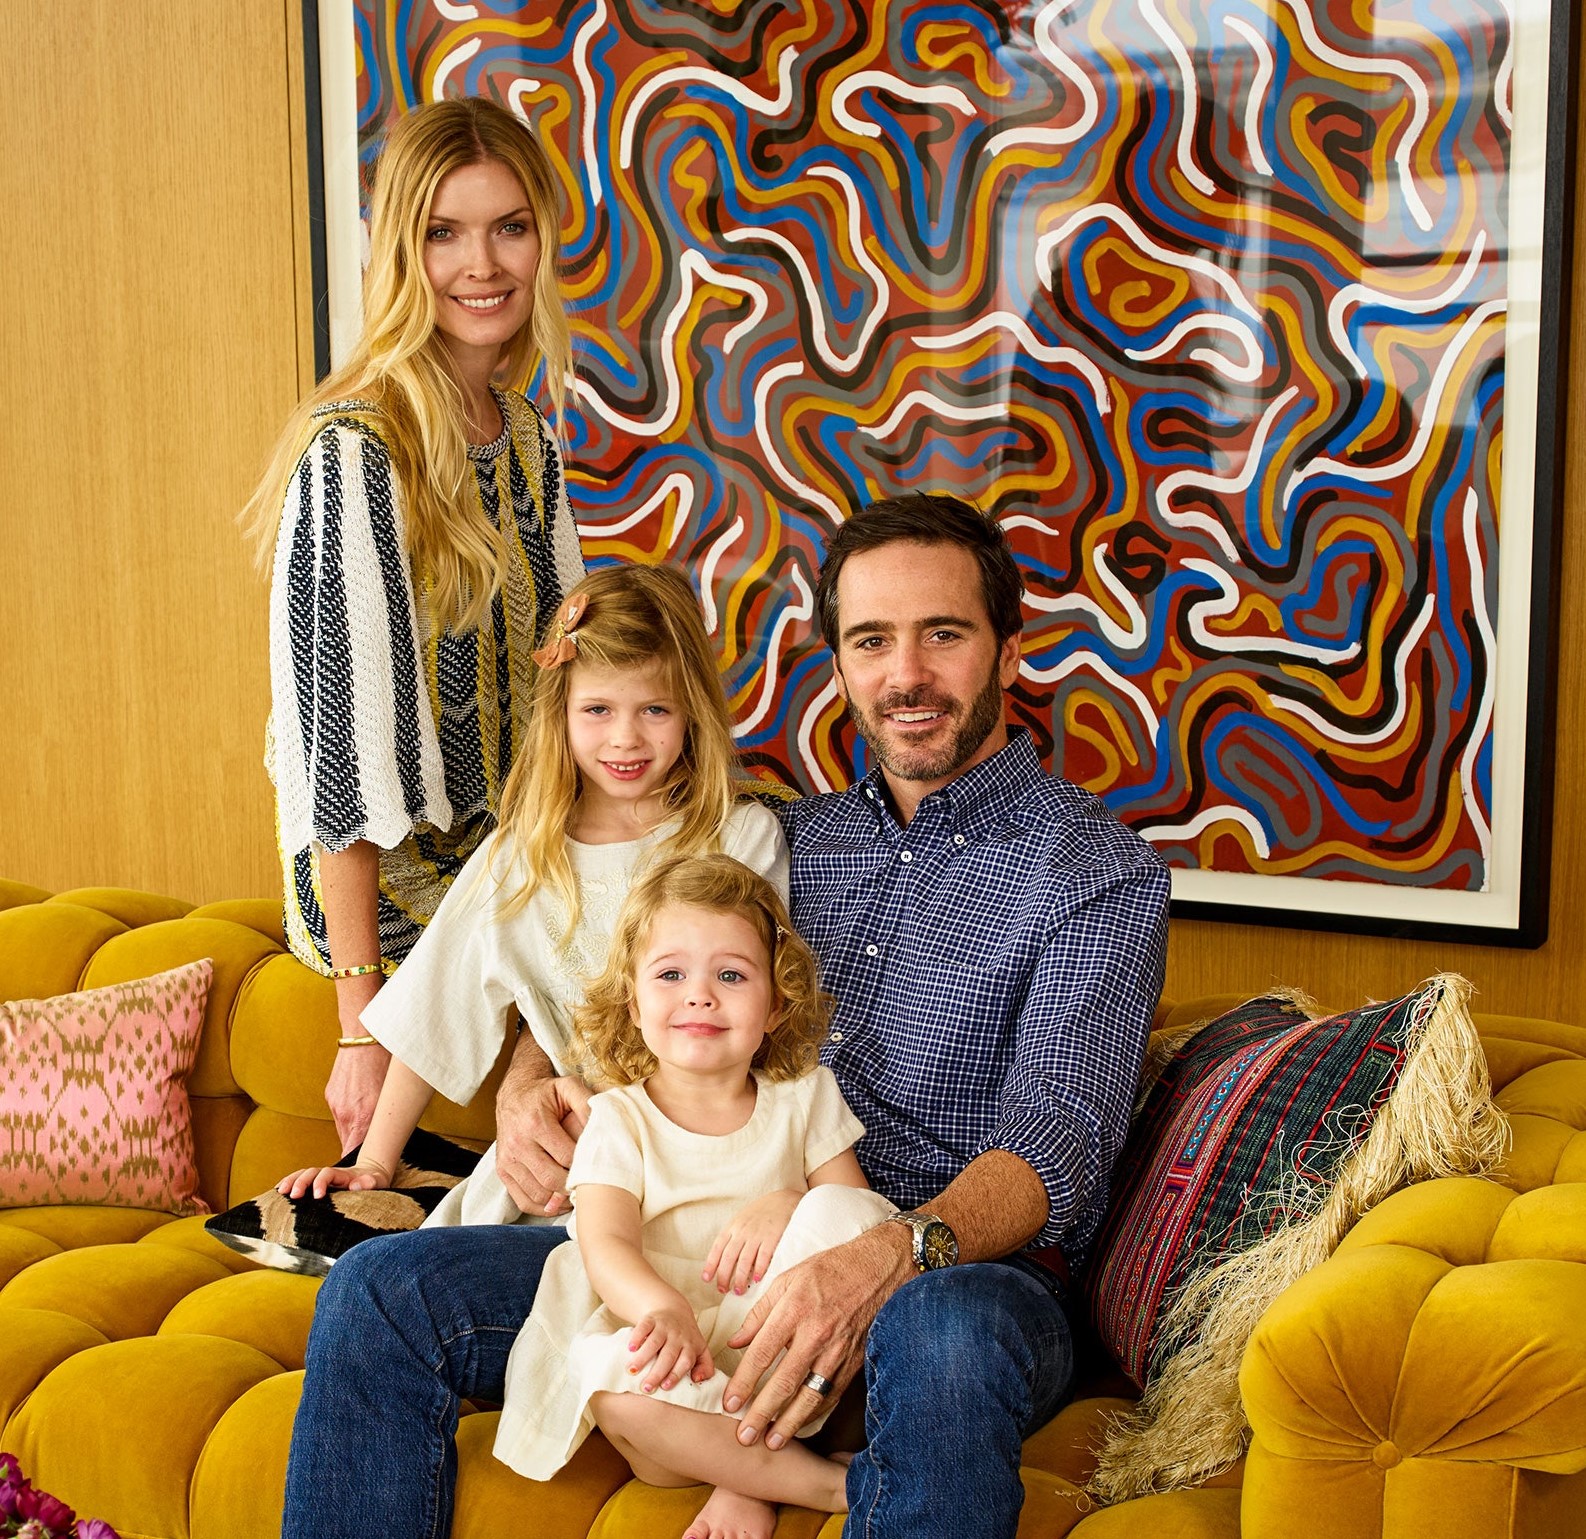 Jimmie Johnson with his wife Chandra Janway and daughters; Genevieve and Lynda.